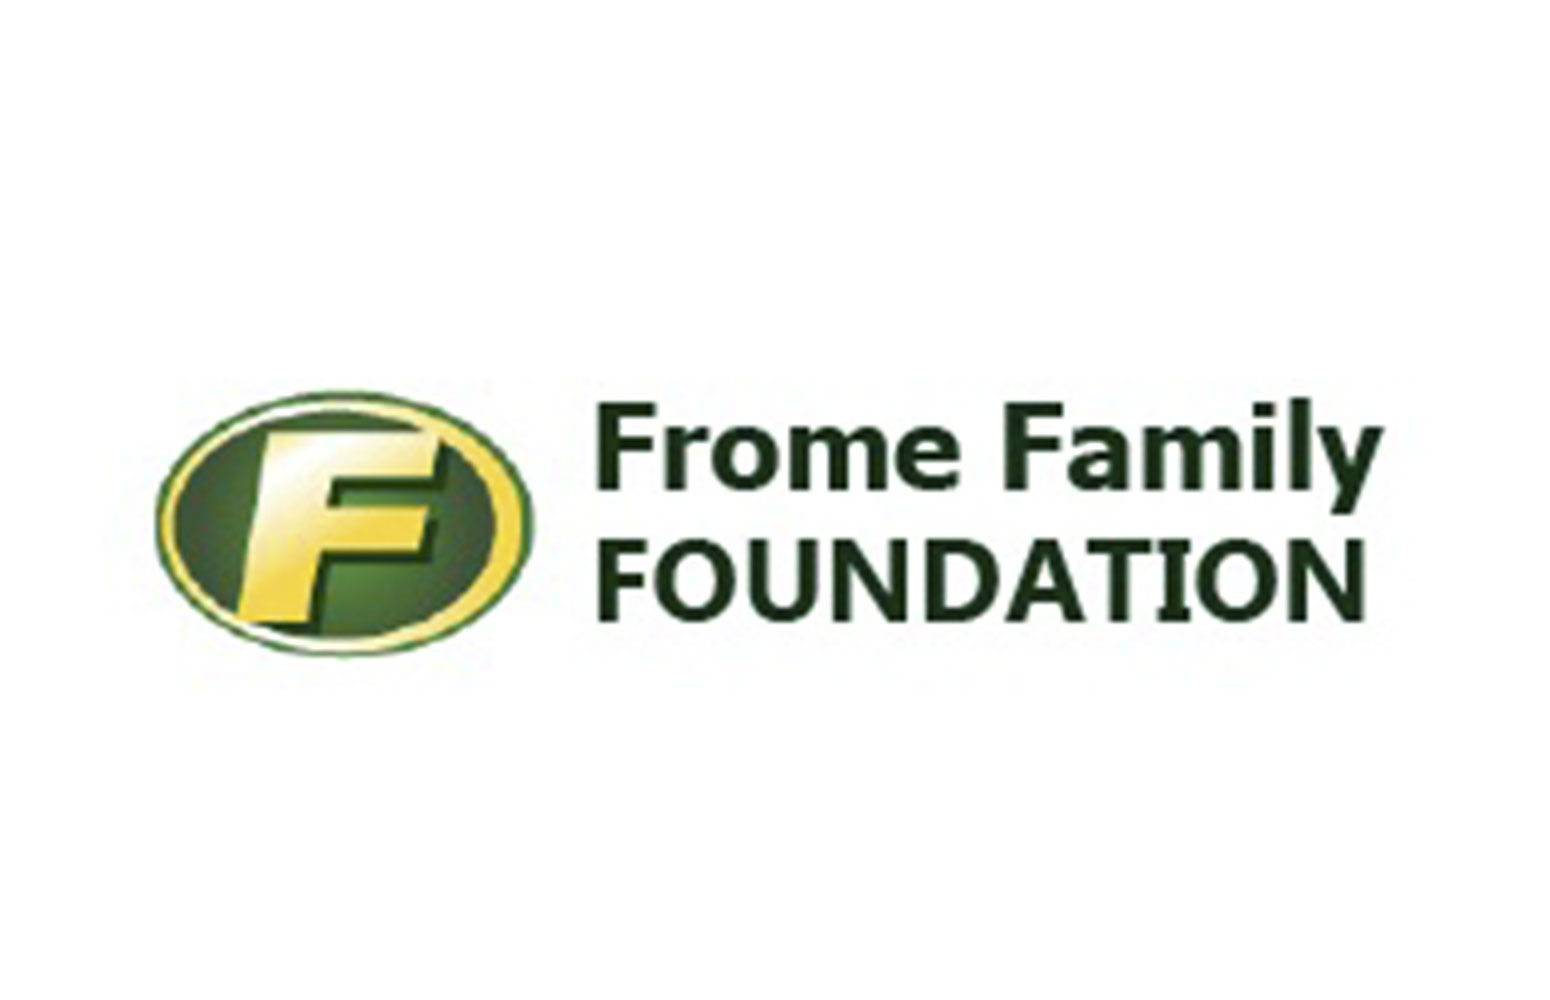 Frome Family Foundation